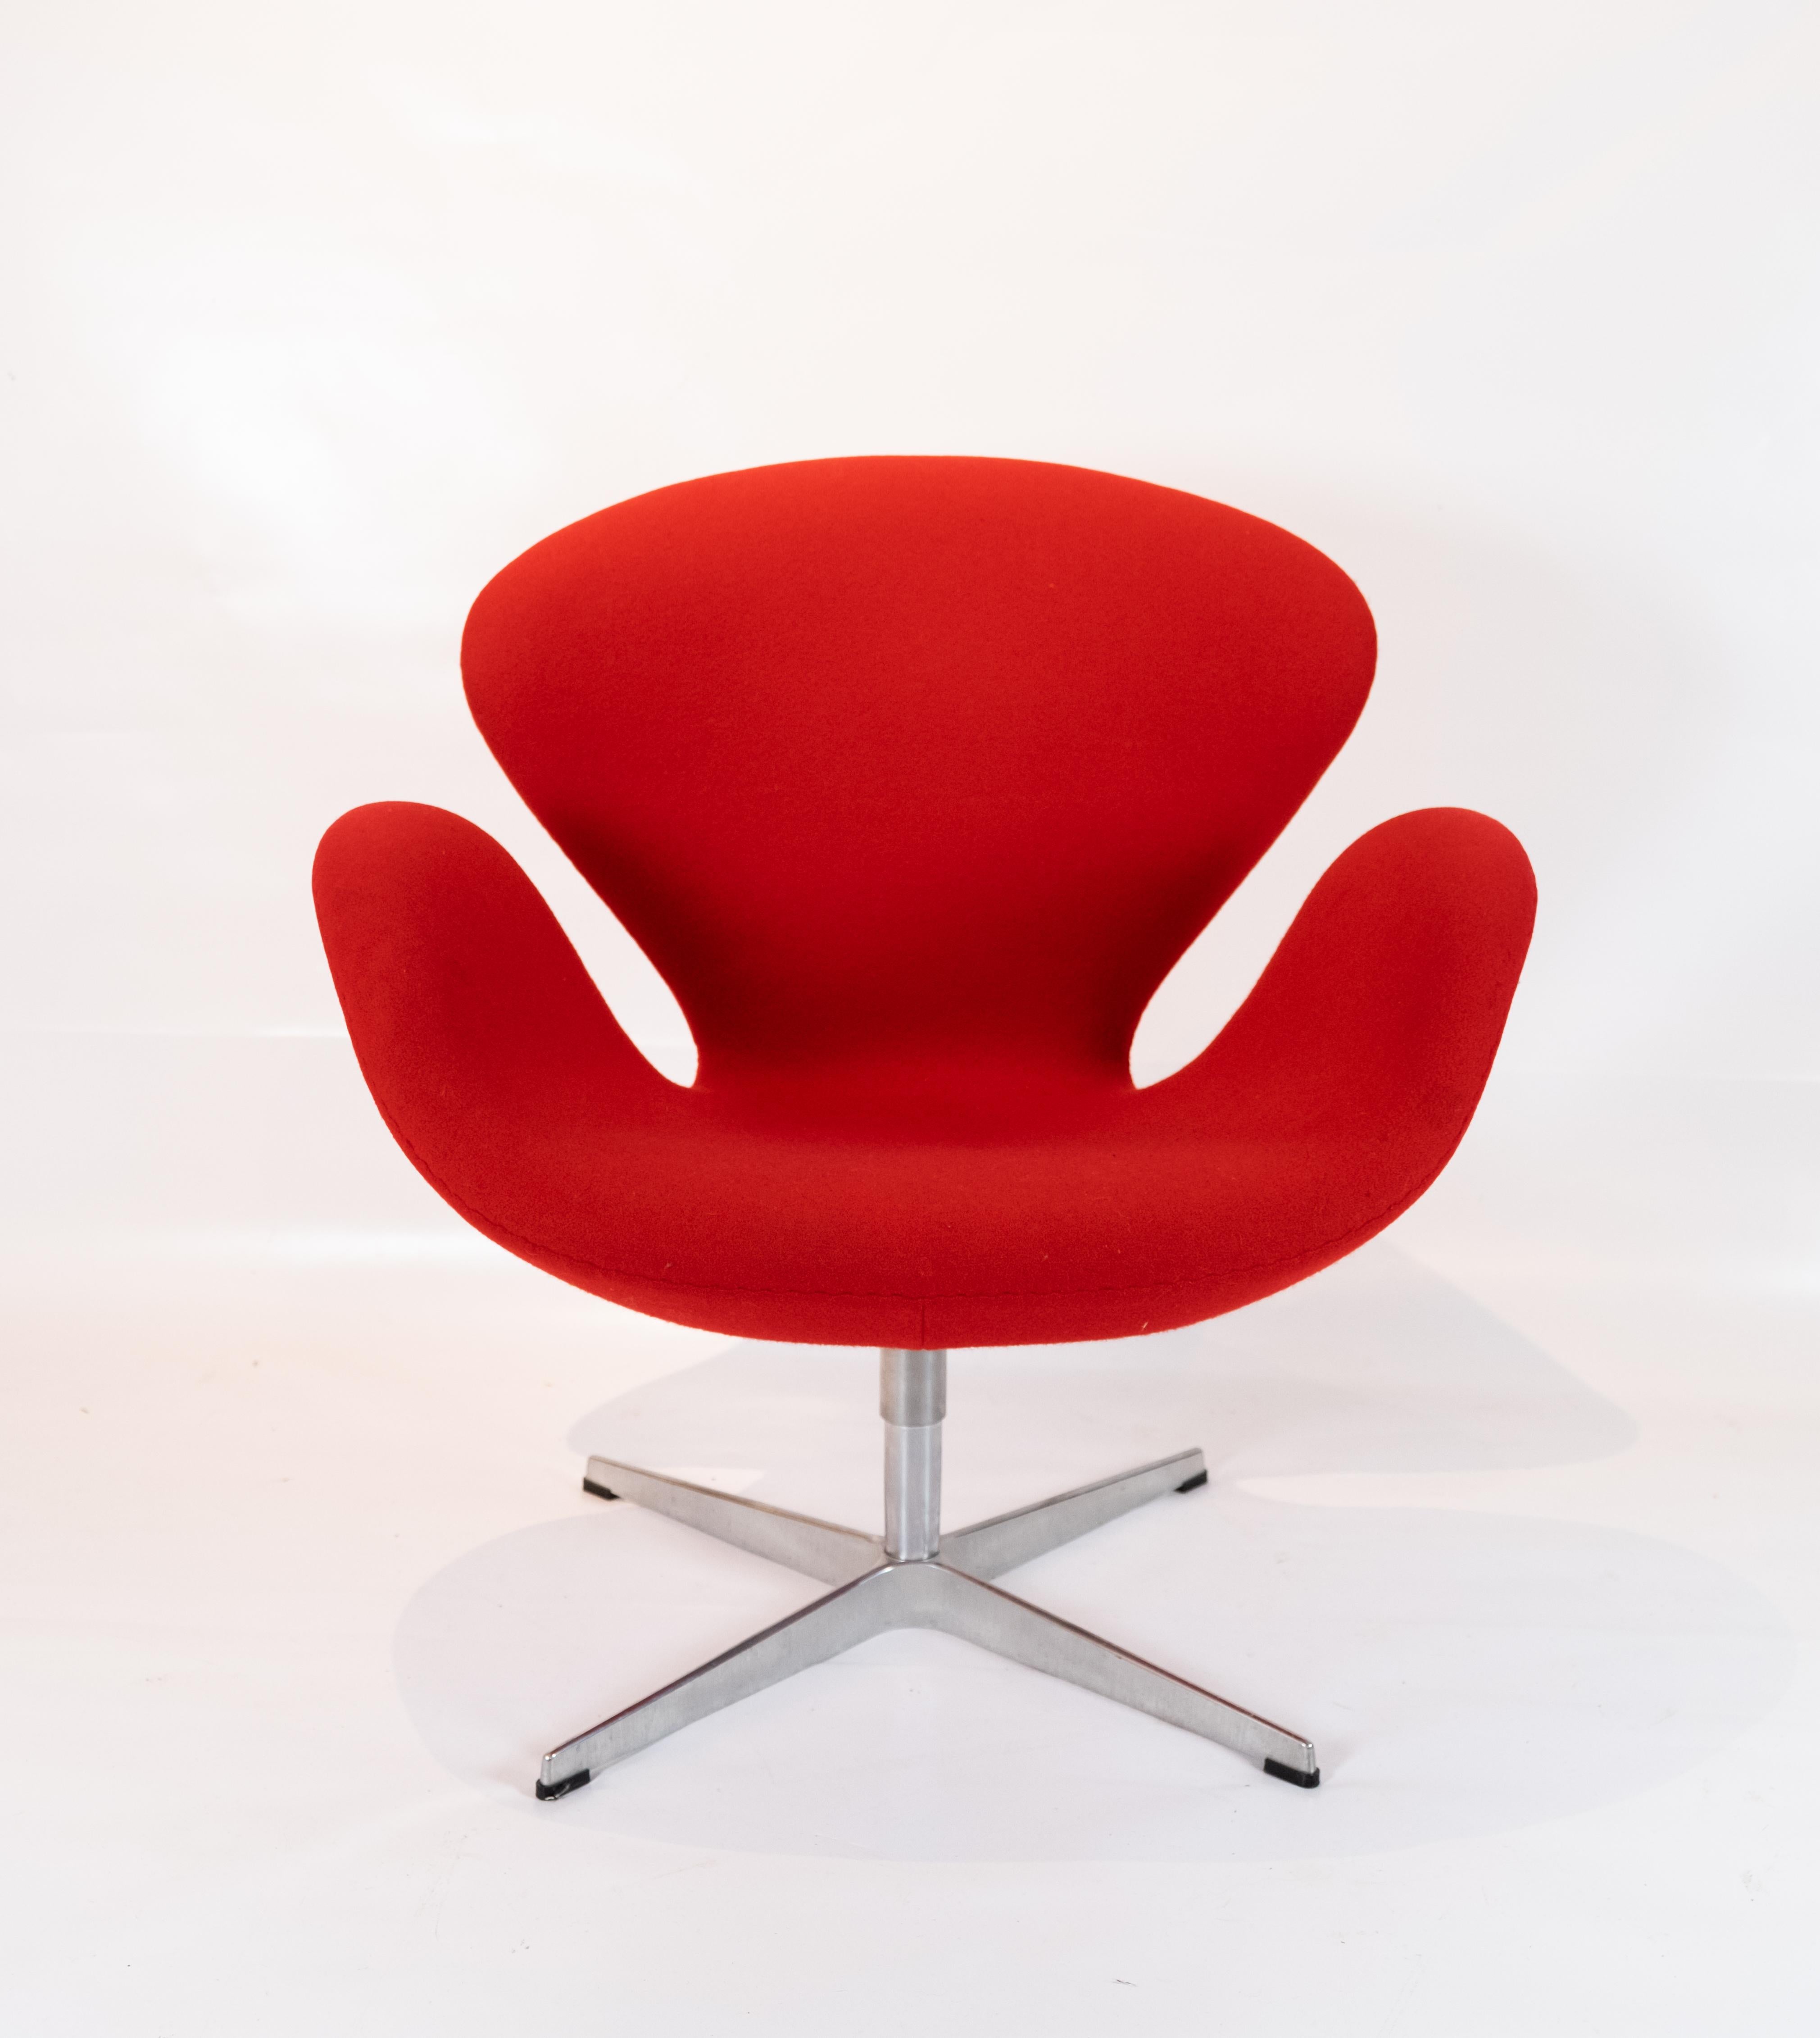 The Swan chair, model 3320, designed by Arne Jacobsen in 1958 and manufactured by Fritz Hansen. The chair is upholstered with red Hallingdal fabric.